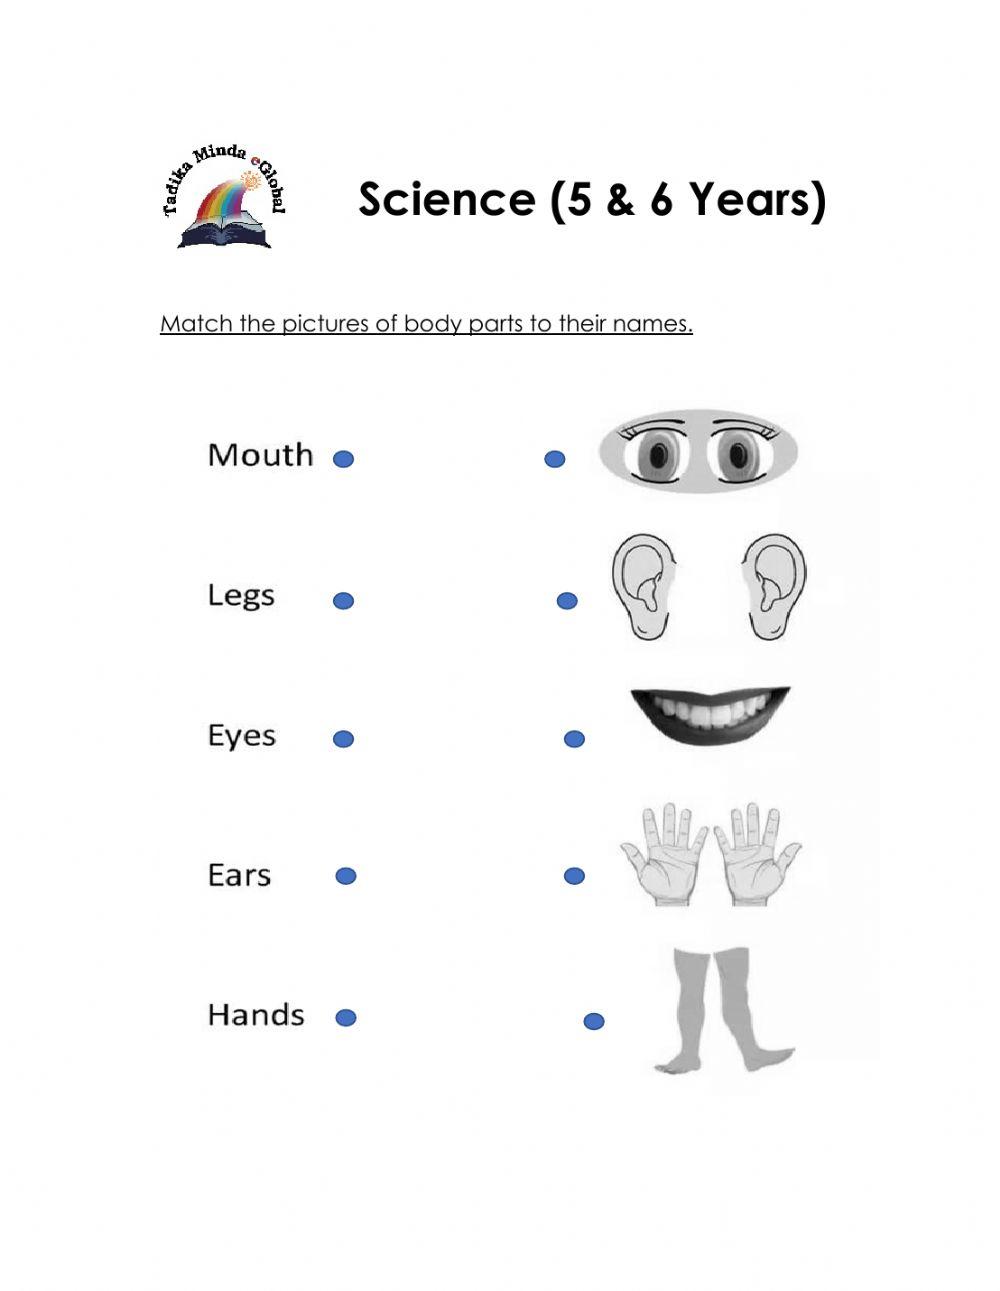 5 & 6 Years: Science (Body Parts 1)